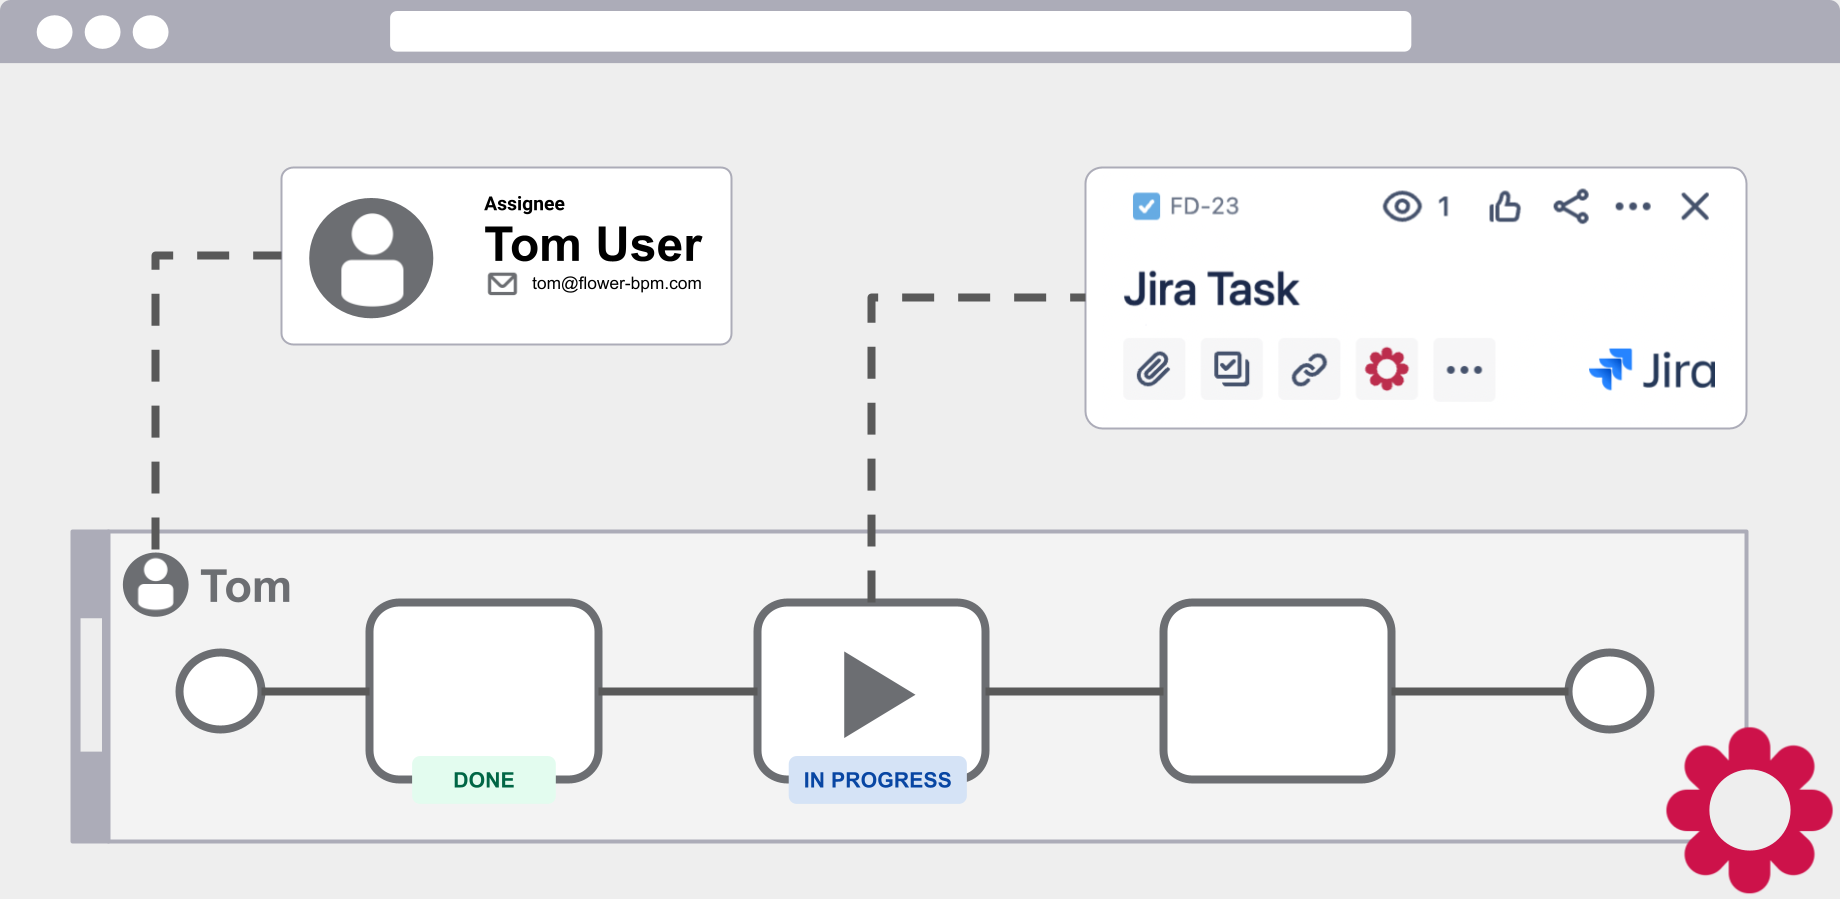 Plan and model your BPMN workflows